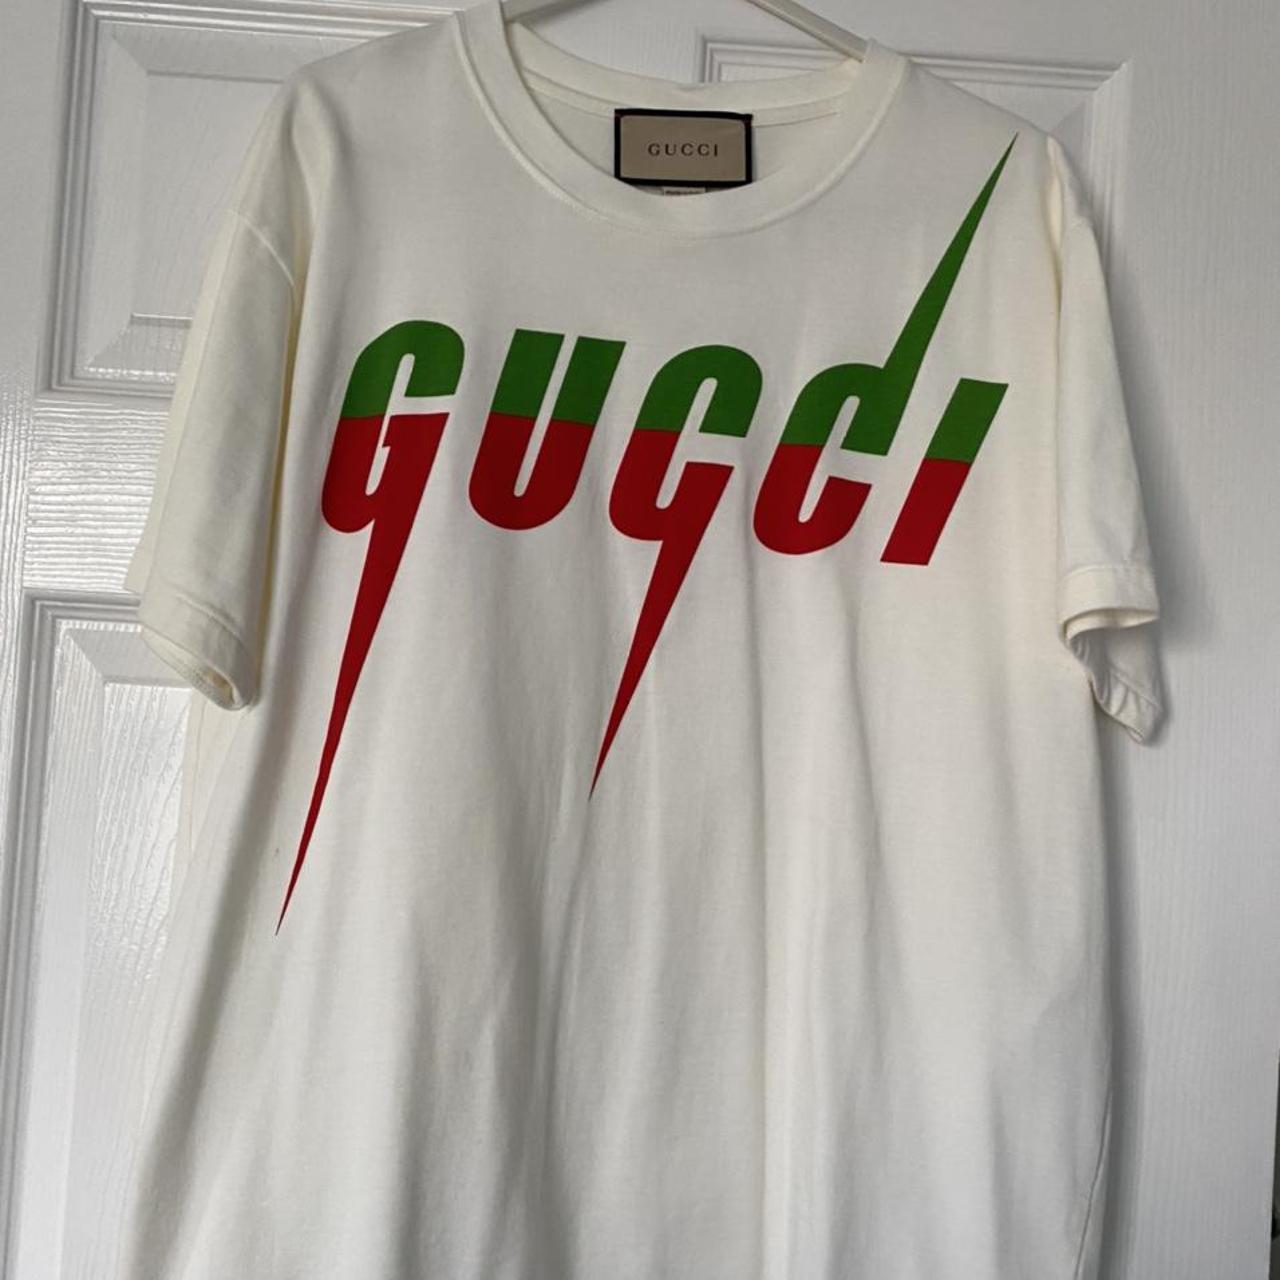 Mens gucci lightning too size large , this top has... - Depop